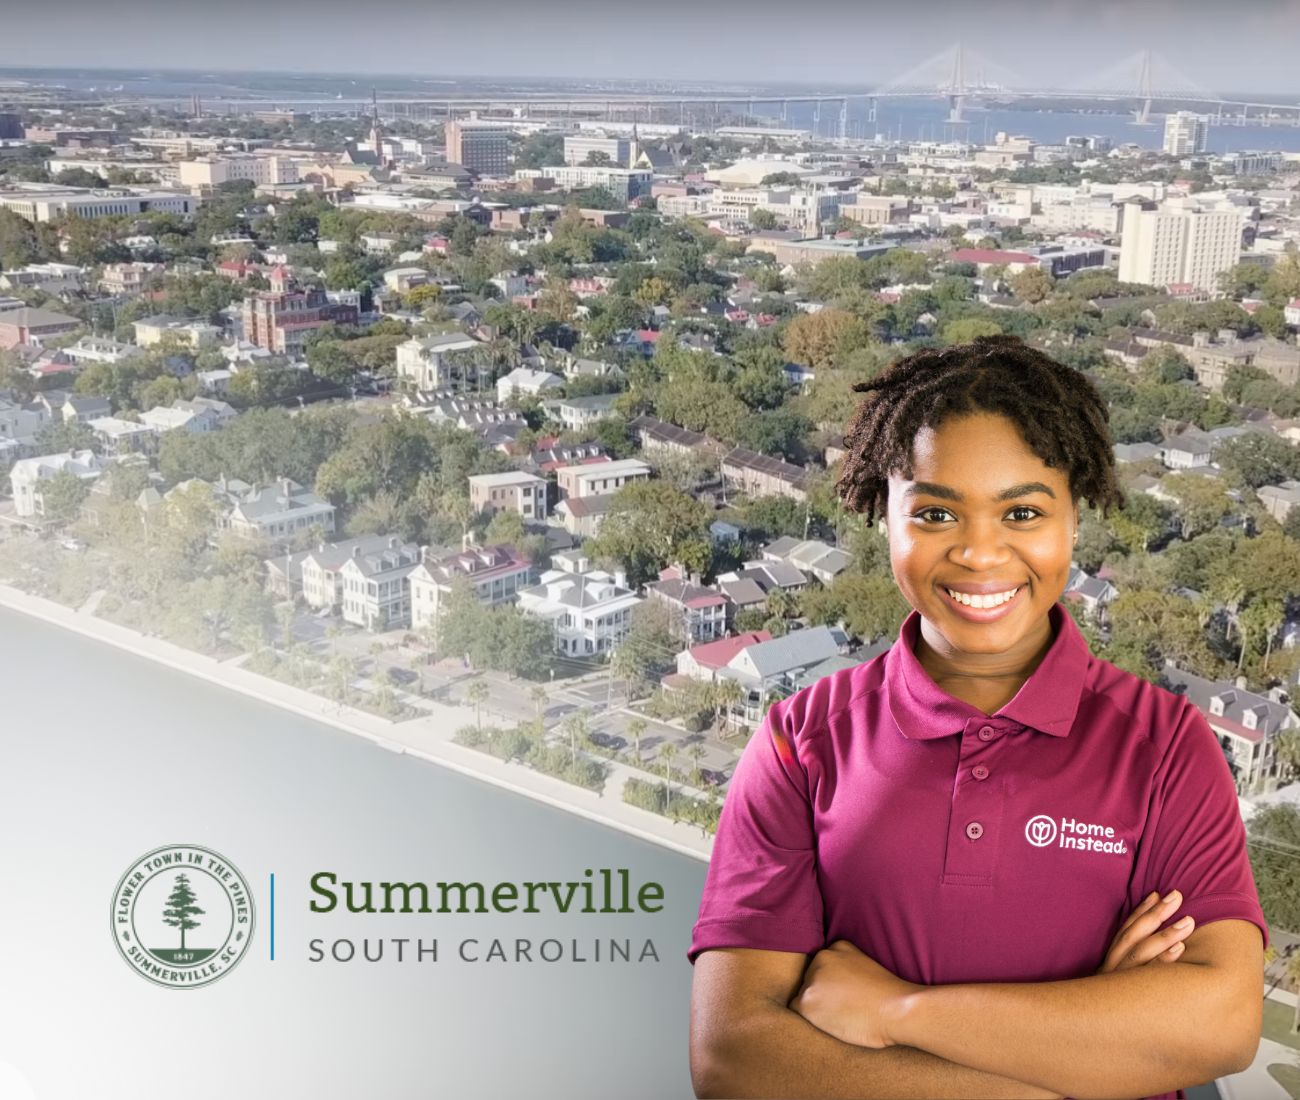 Home Instead caregiver with Summerville, South Carolina in the background